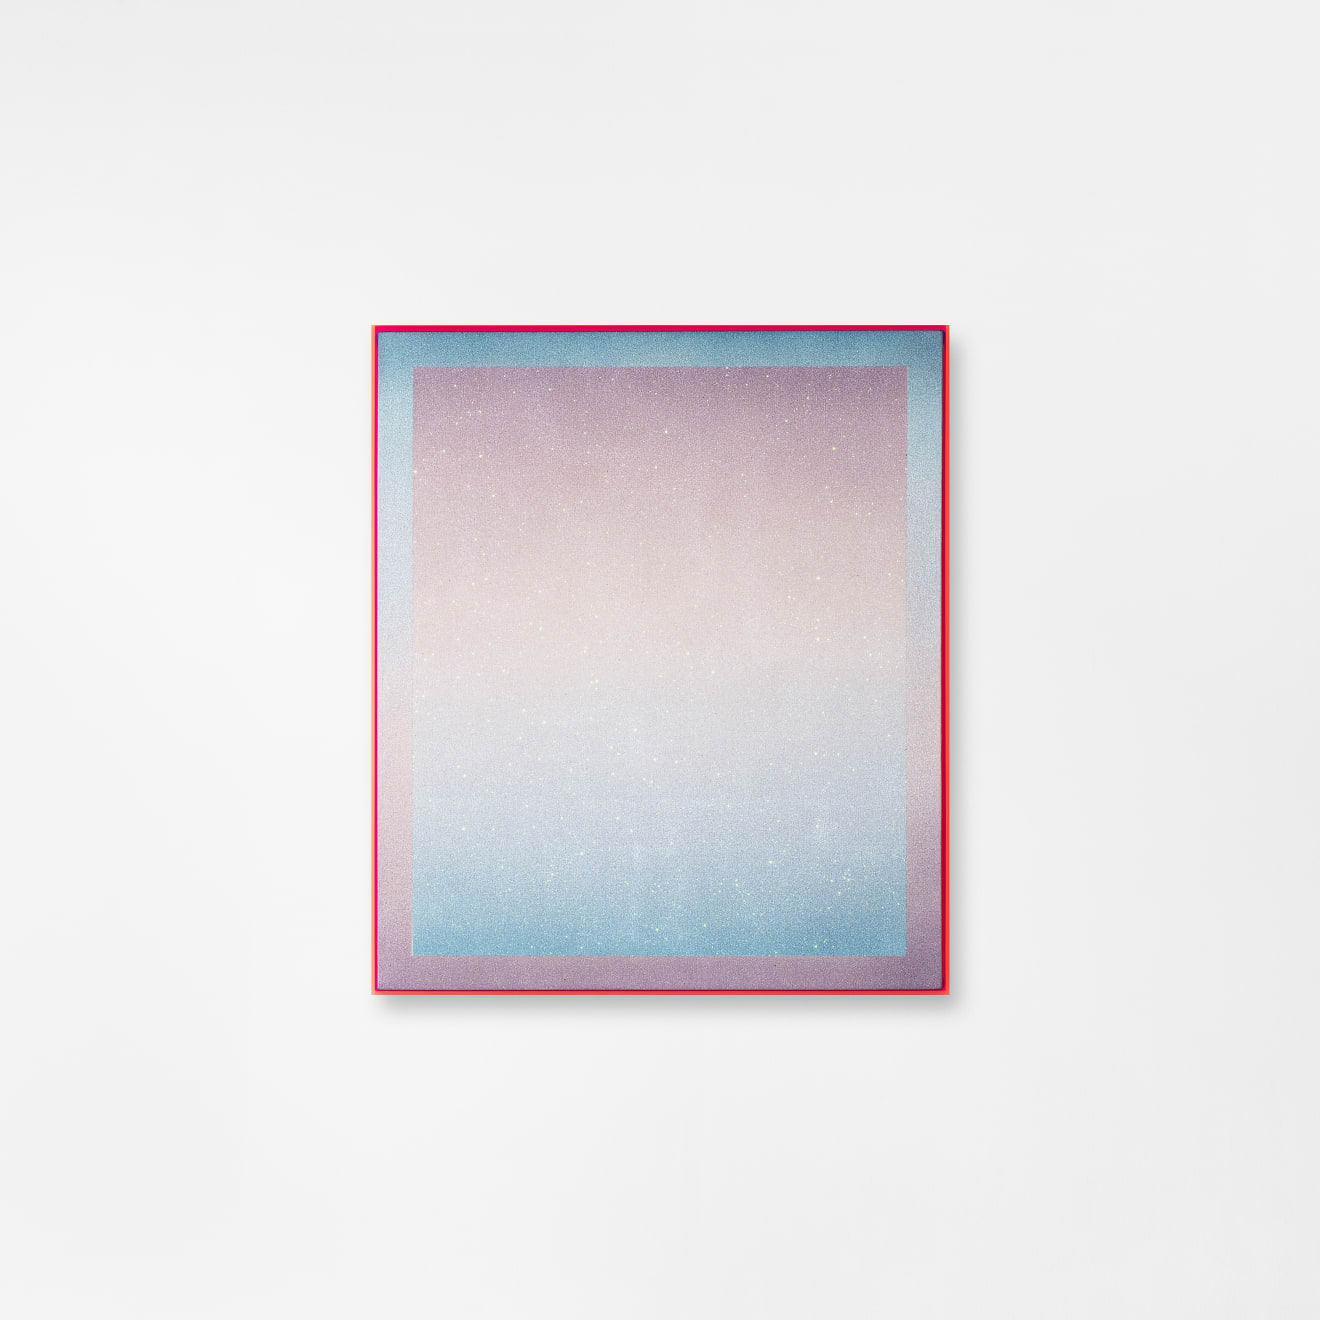 Rosie Mudge It’s only you down there sleep with the tides Automotive Paint and Glitter Glue on Canvas Original Pink Neon Perspex Frame 61 x 71 cm AUD $1900 GBP £925 SOLD